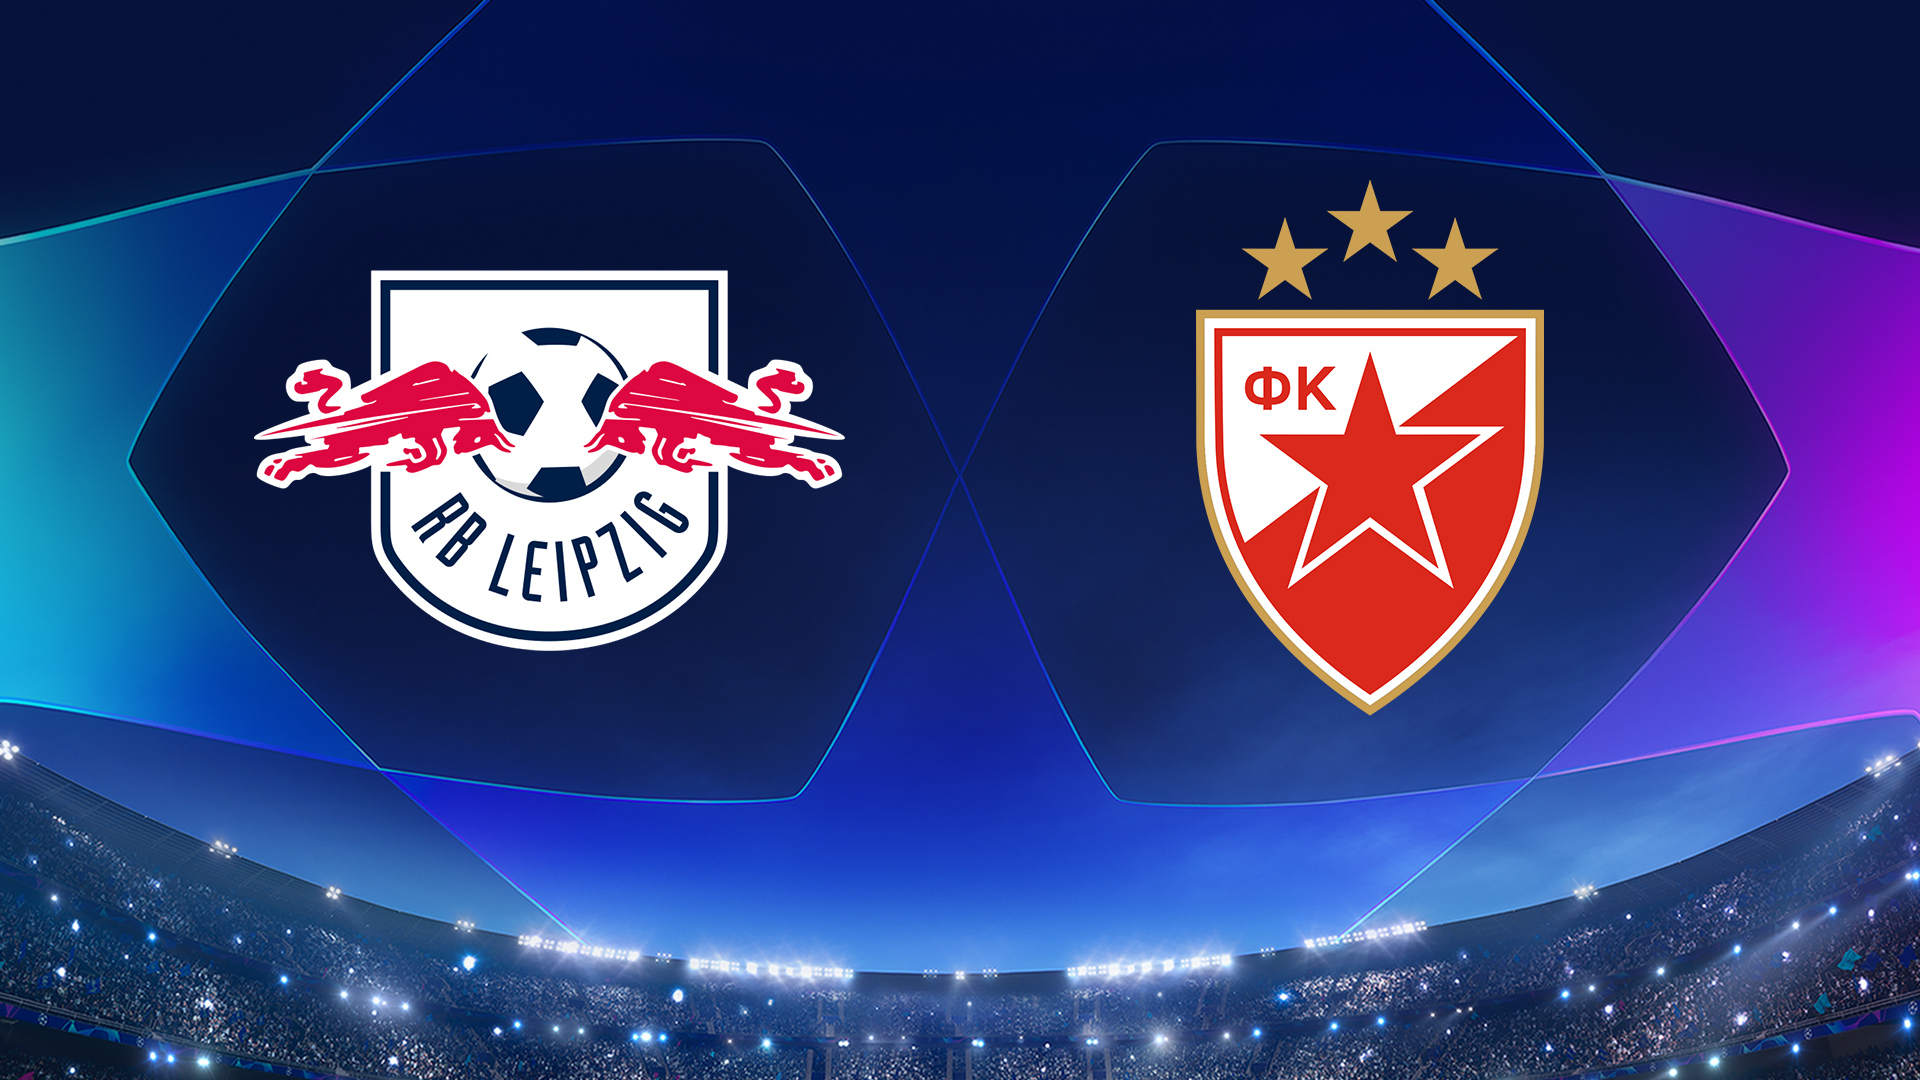 Watch FK Crvena zvezda, RB Leipzig: Stream UEFA Champions League live - How  to Watch and Stream Major League & College Sports - Sports Illustrated.